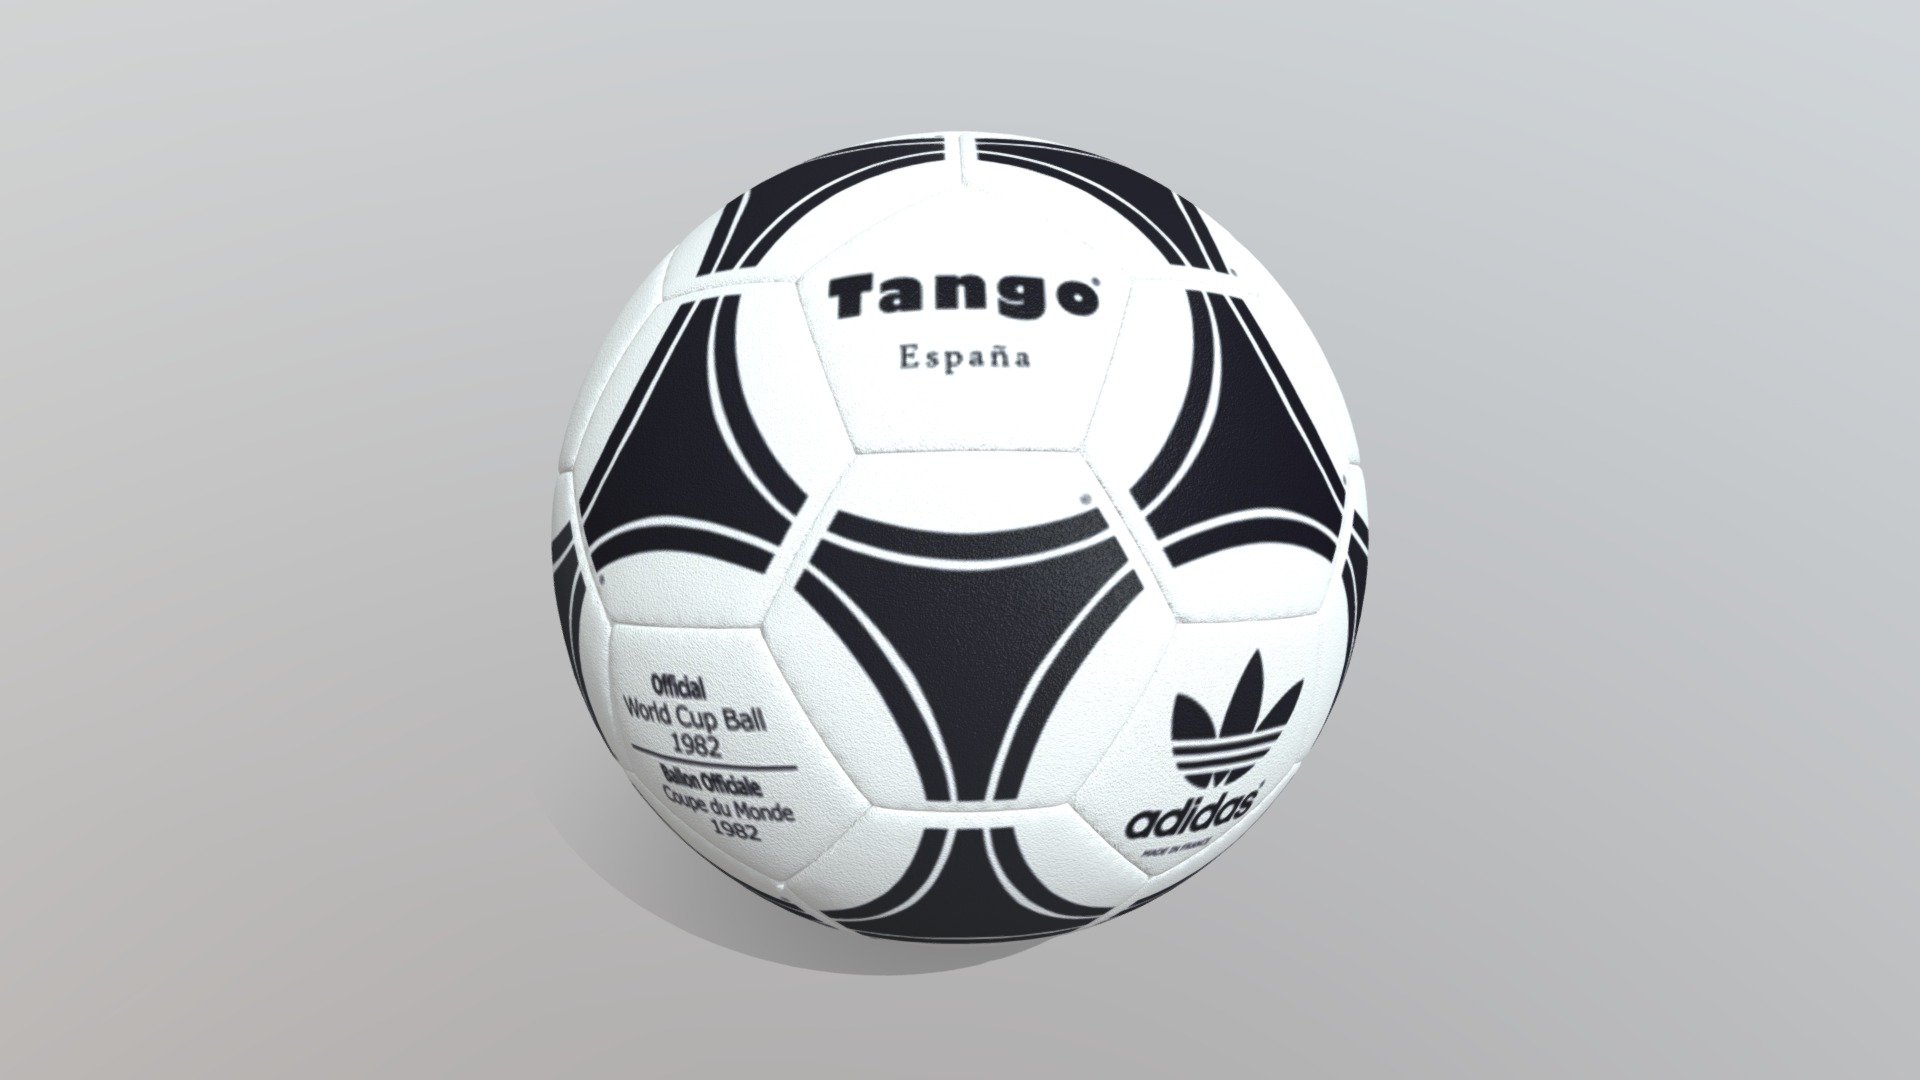 Soccerball - Adidas Tango 1982 - Download Free 3D model by fra978 (@fra978)